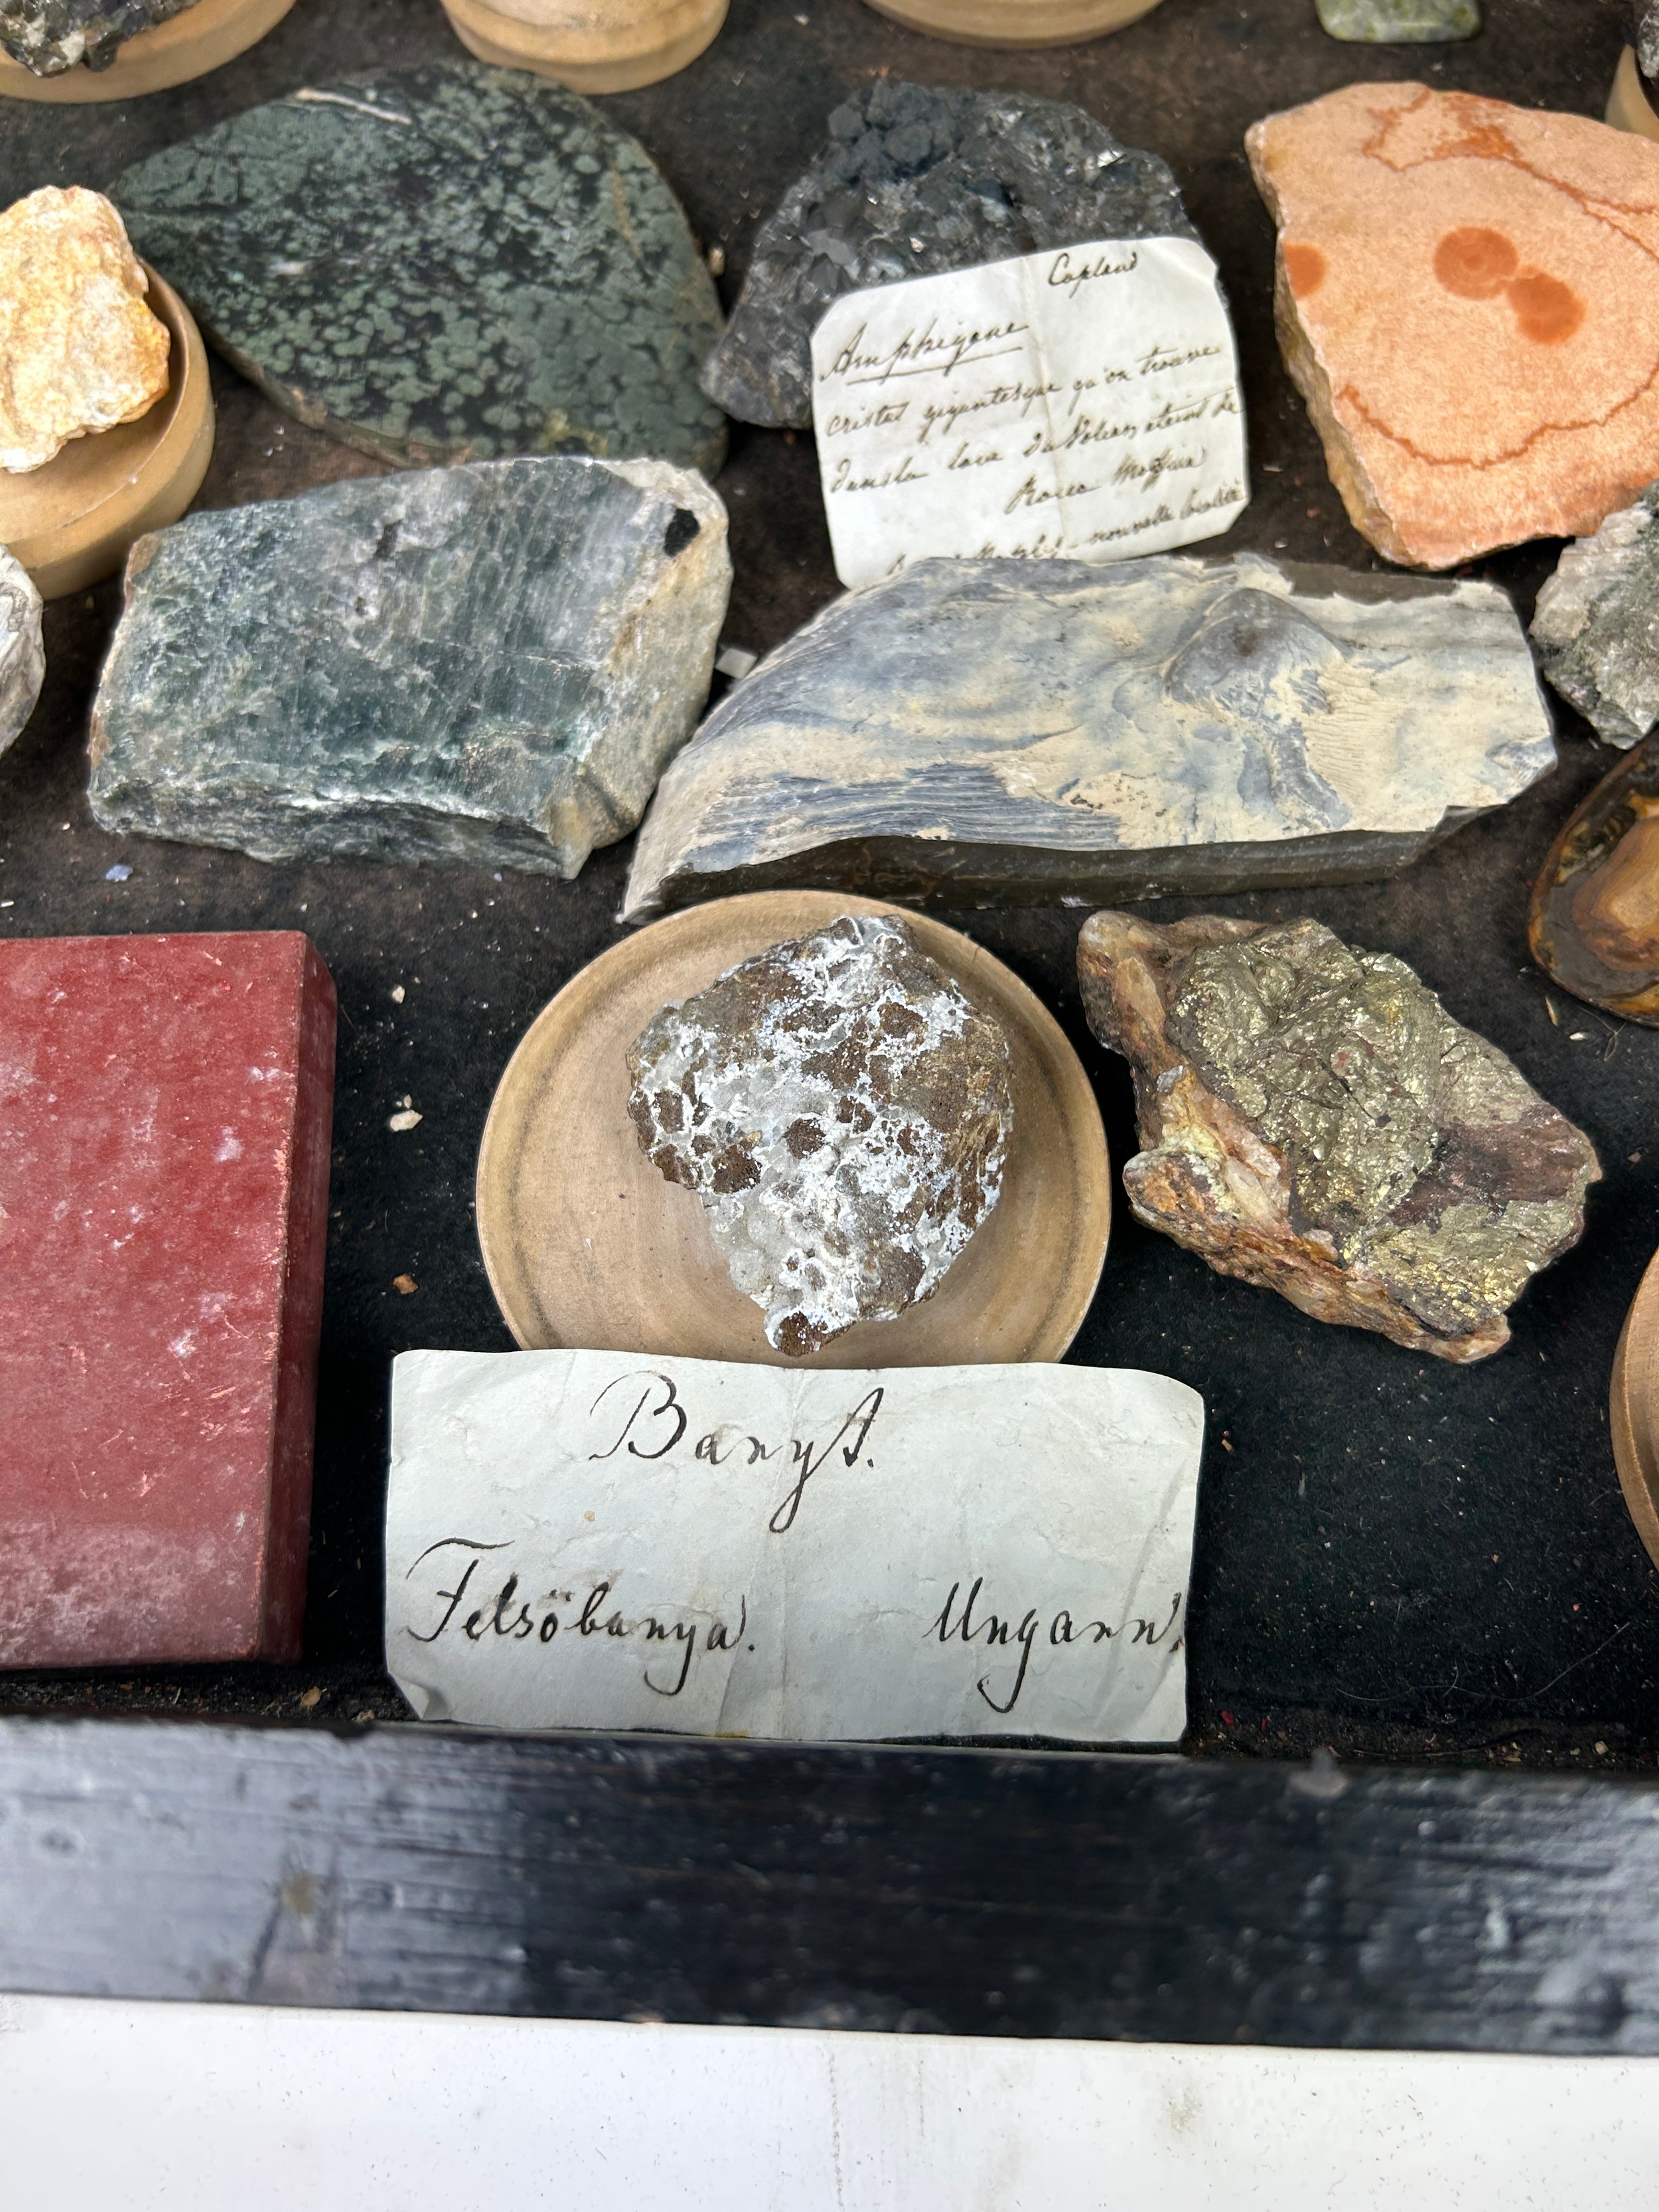 A RARE CABINET COLLECTION OF MINERALS CIRCA 1810-1860, including minerals probably collected by - Image 31 of 33